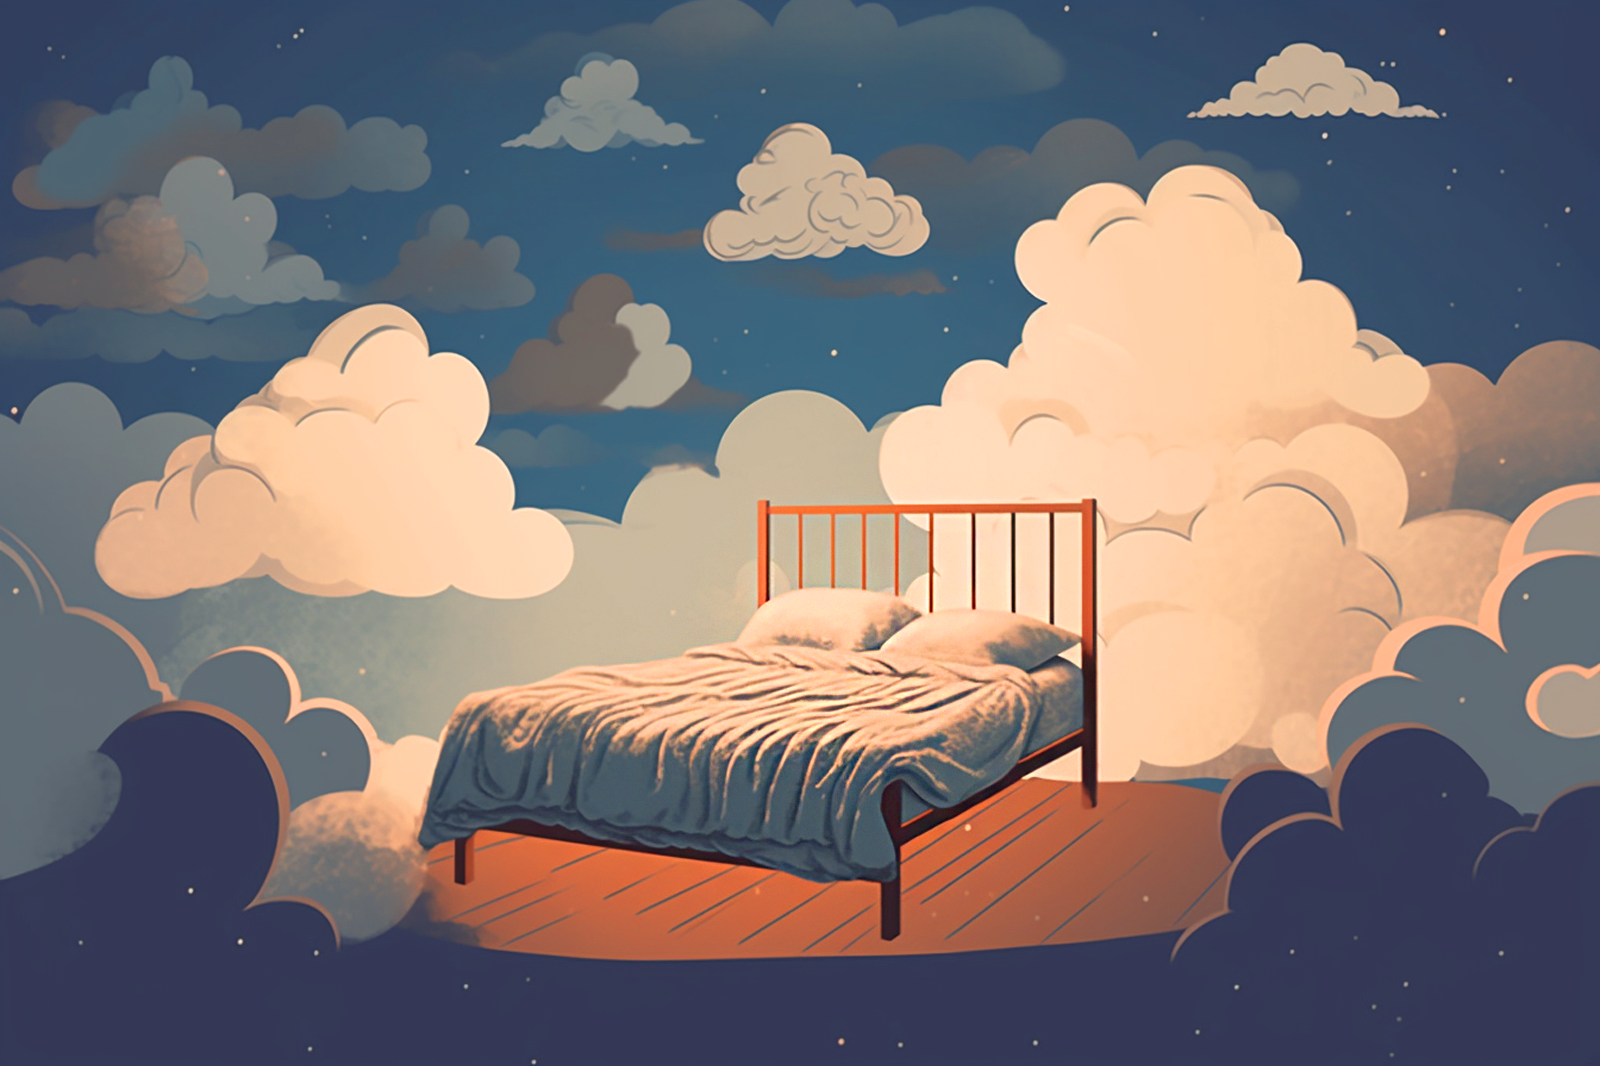 A surreal image of a bed suspended in mid-air, surrounded by stars, white clouds, and a serene blue sky in a fantasy setting